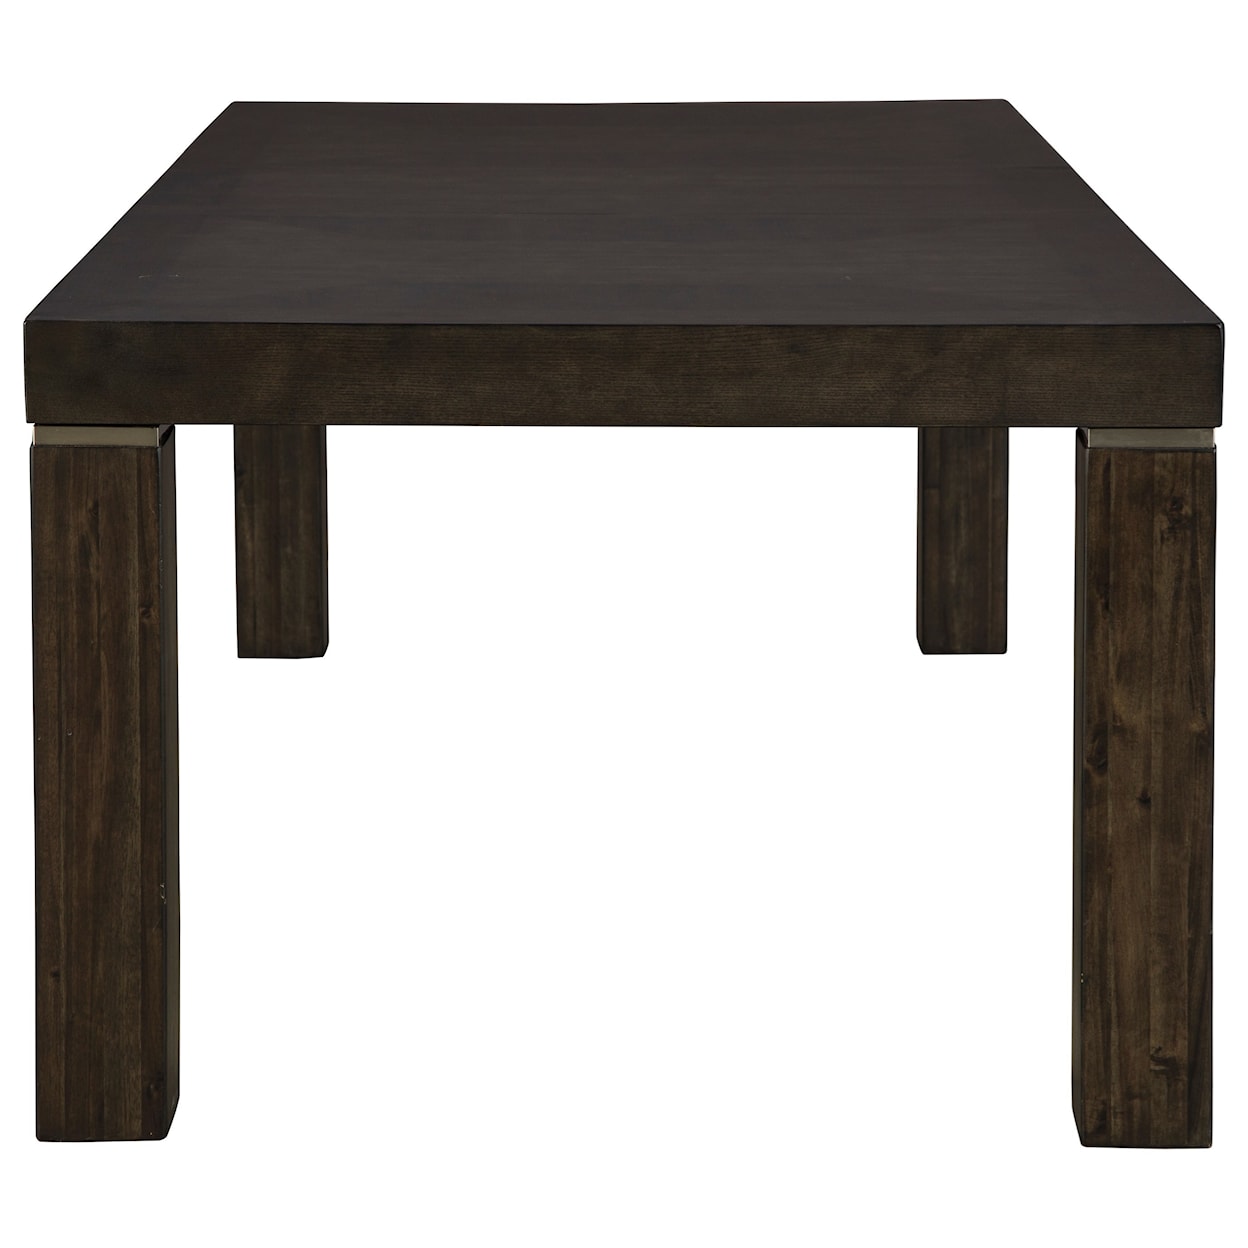 Ashley Signature Design Hyndell Rectangular Dining Room Extension Table